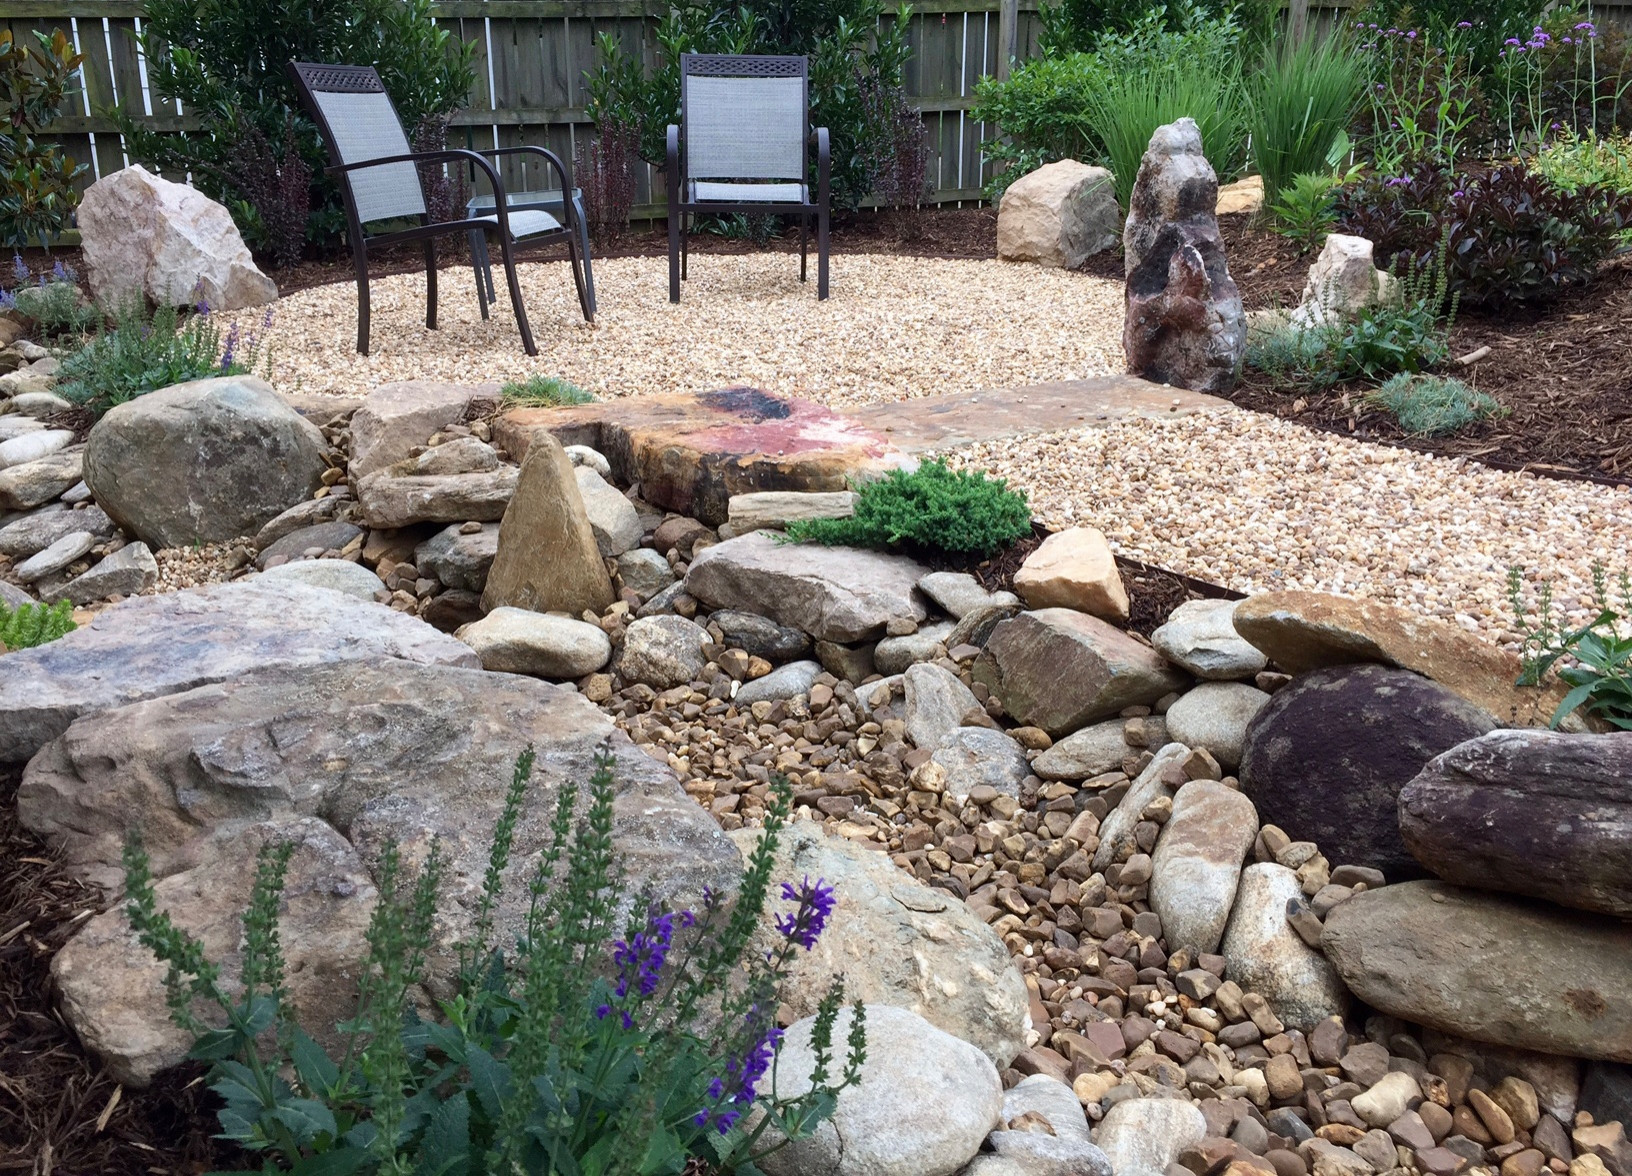 Seating area and creek bed